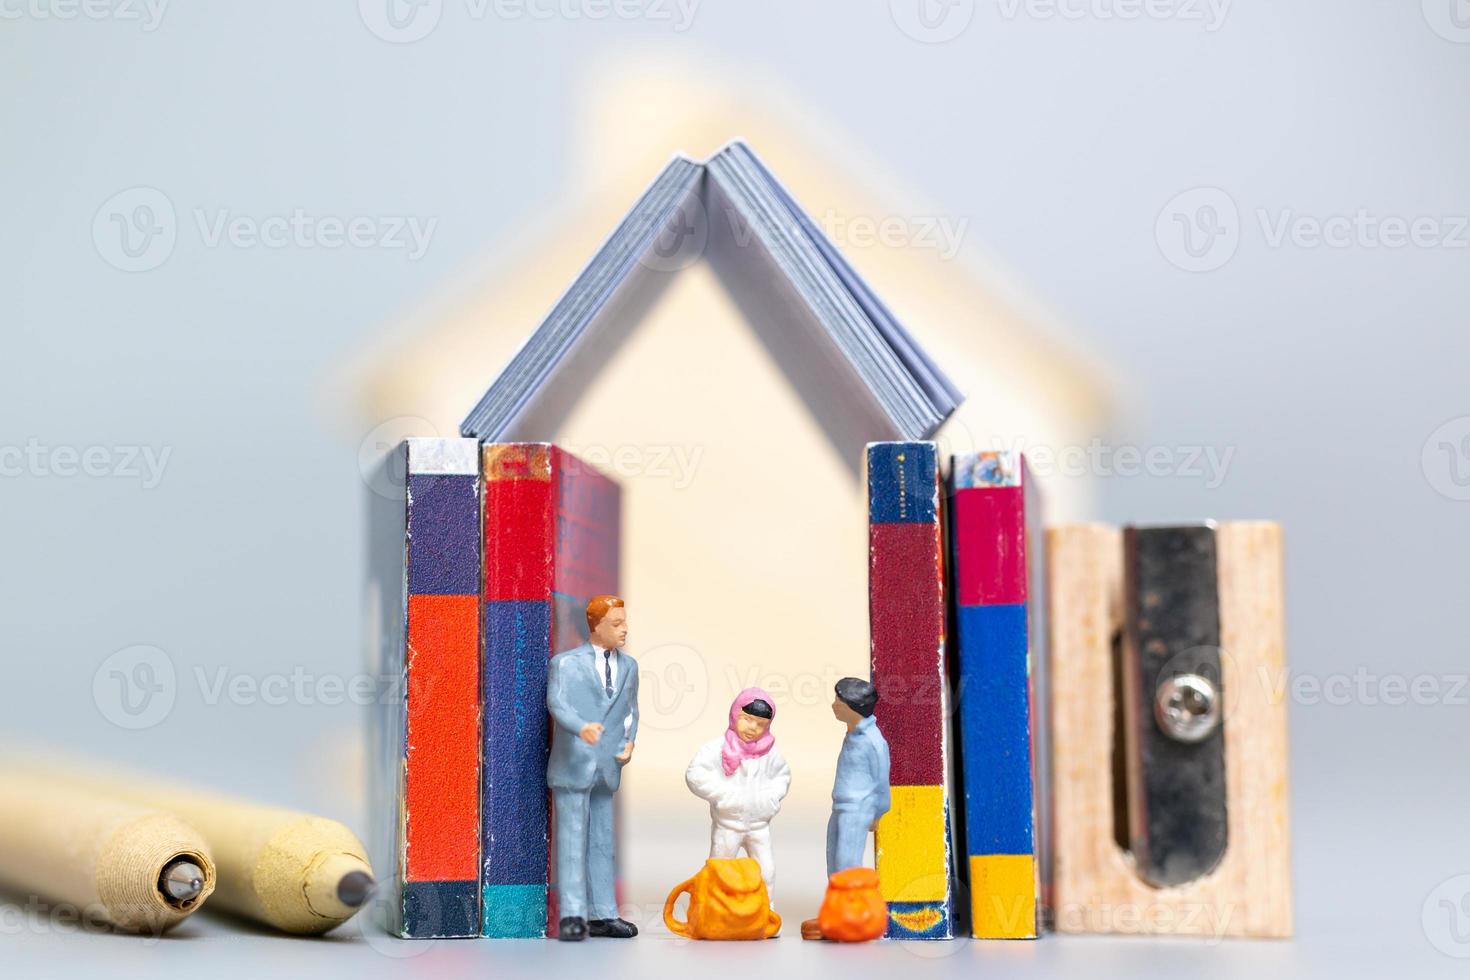 Miniature people, student and teacher with stationery tools, back to school concept photo